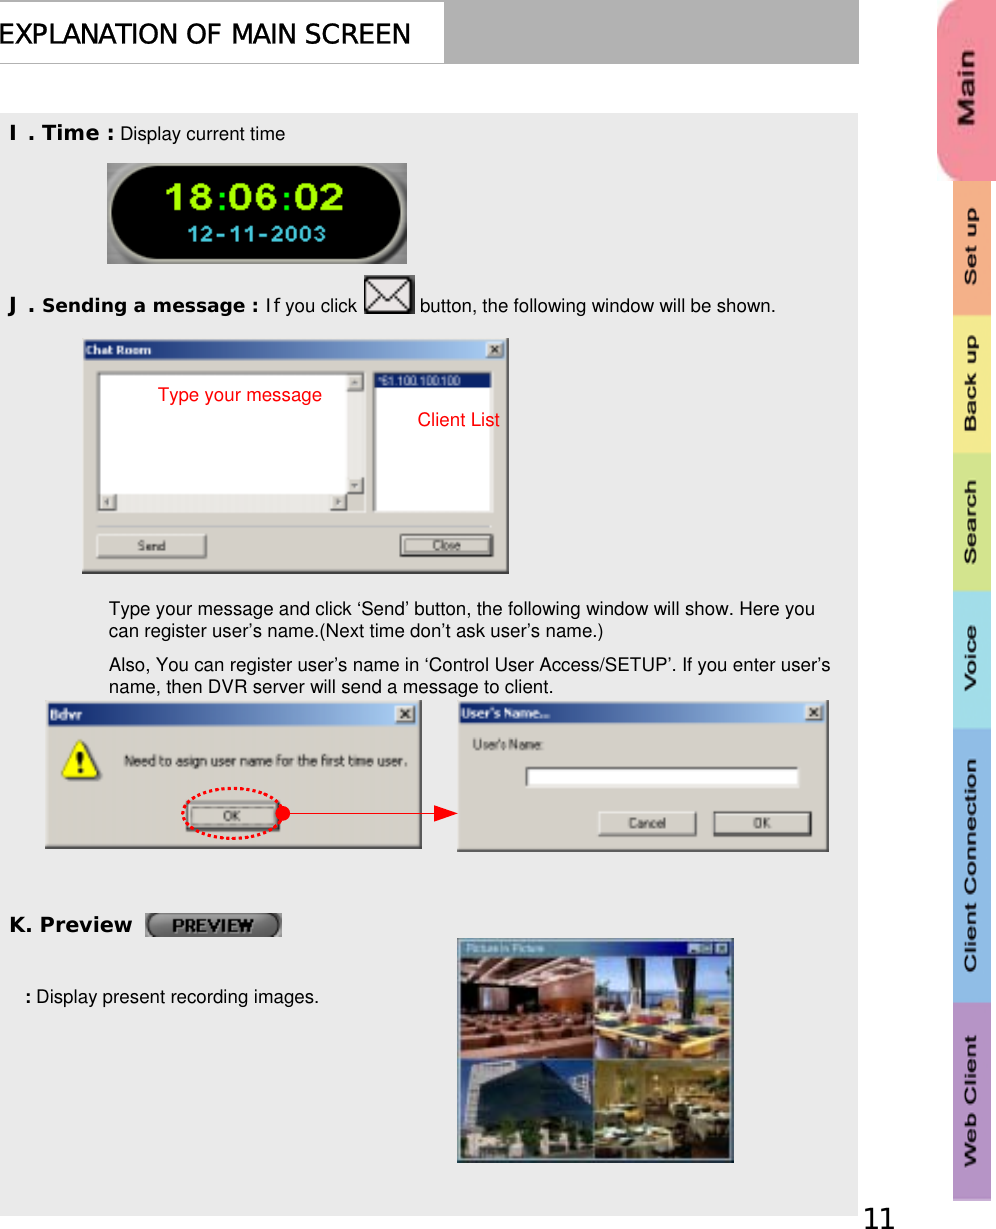 11EXPLANATION OF MAIN SCREENI . Time : Display current timeJ . Sending a message : If you click            button, the following window will be shown.Type your message and click ‘Send’ button, the following window will show. Here you can register user’s name.(Next time don’t ask user’s name.)Also, You can register user’s name in ‘Control User Access/SETUP’. If you enter user’s name, then DVR server will send a message to client.K. Preview : Display present recording images.Type your messageClient List 